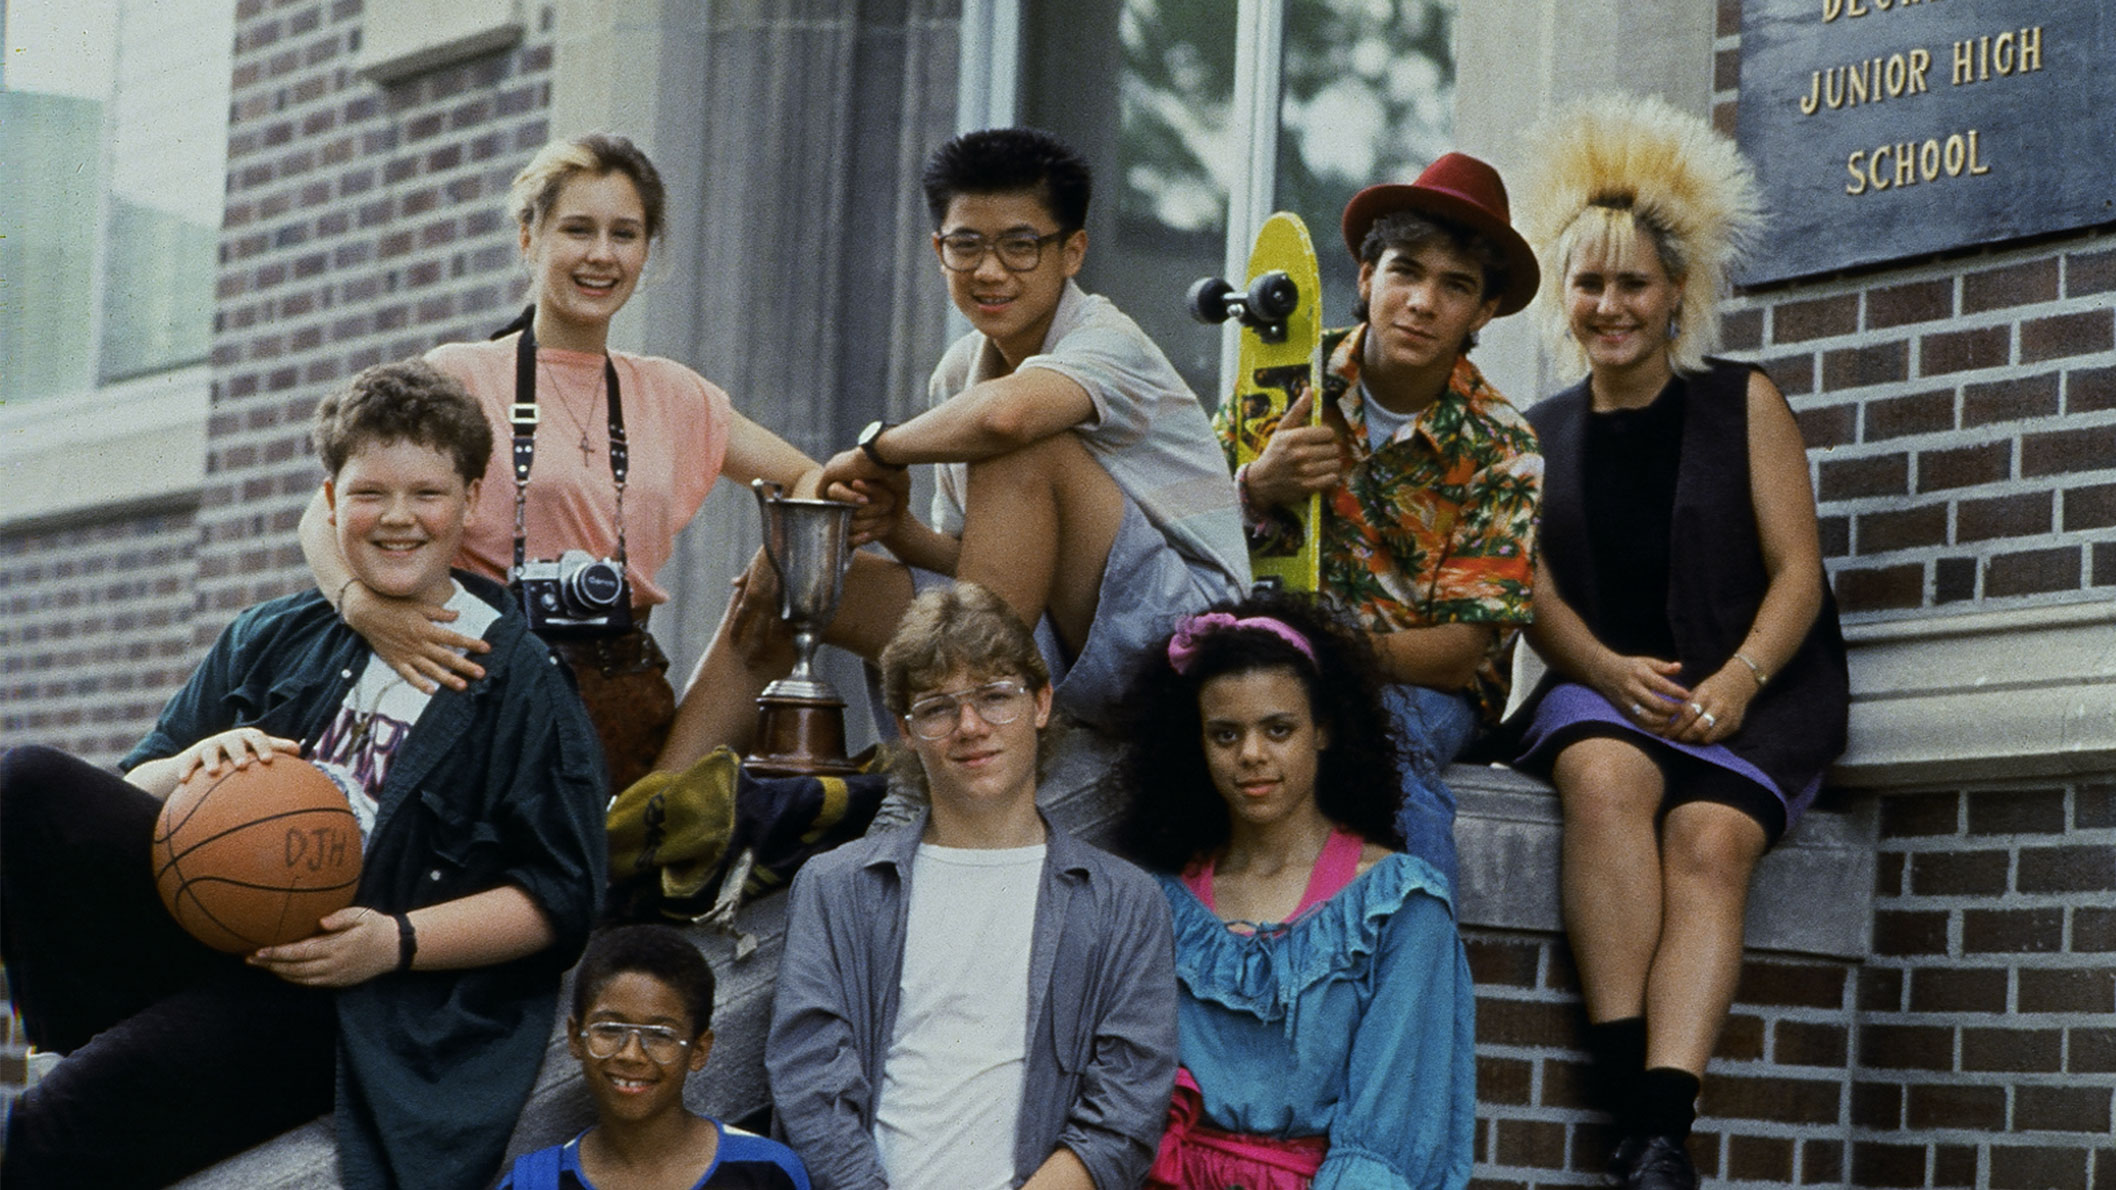 A group of teenagers from the 1980s posing for a photo in front of a high school. 